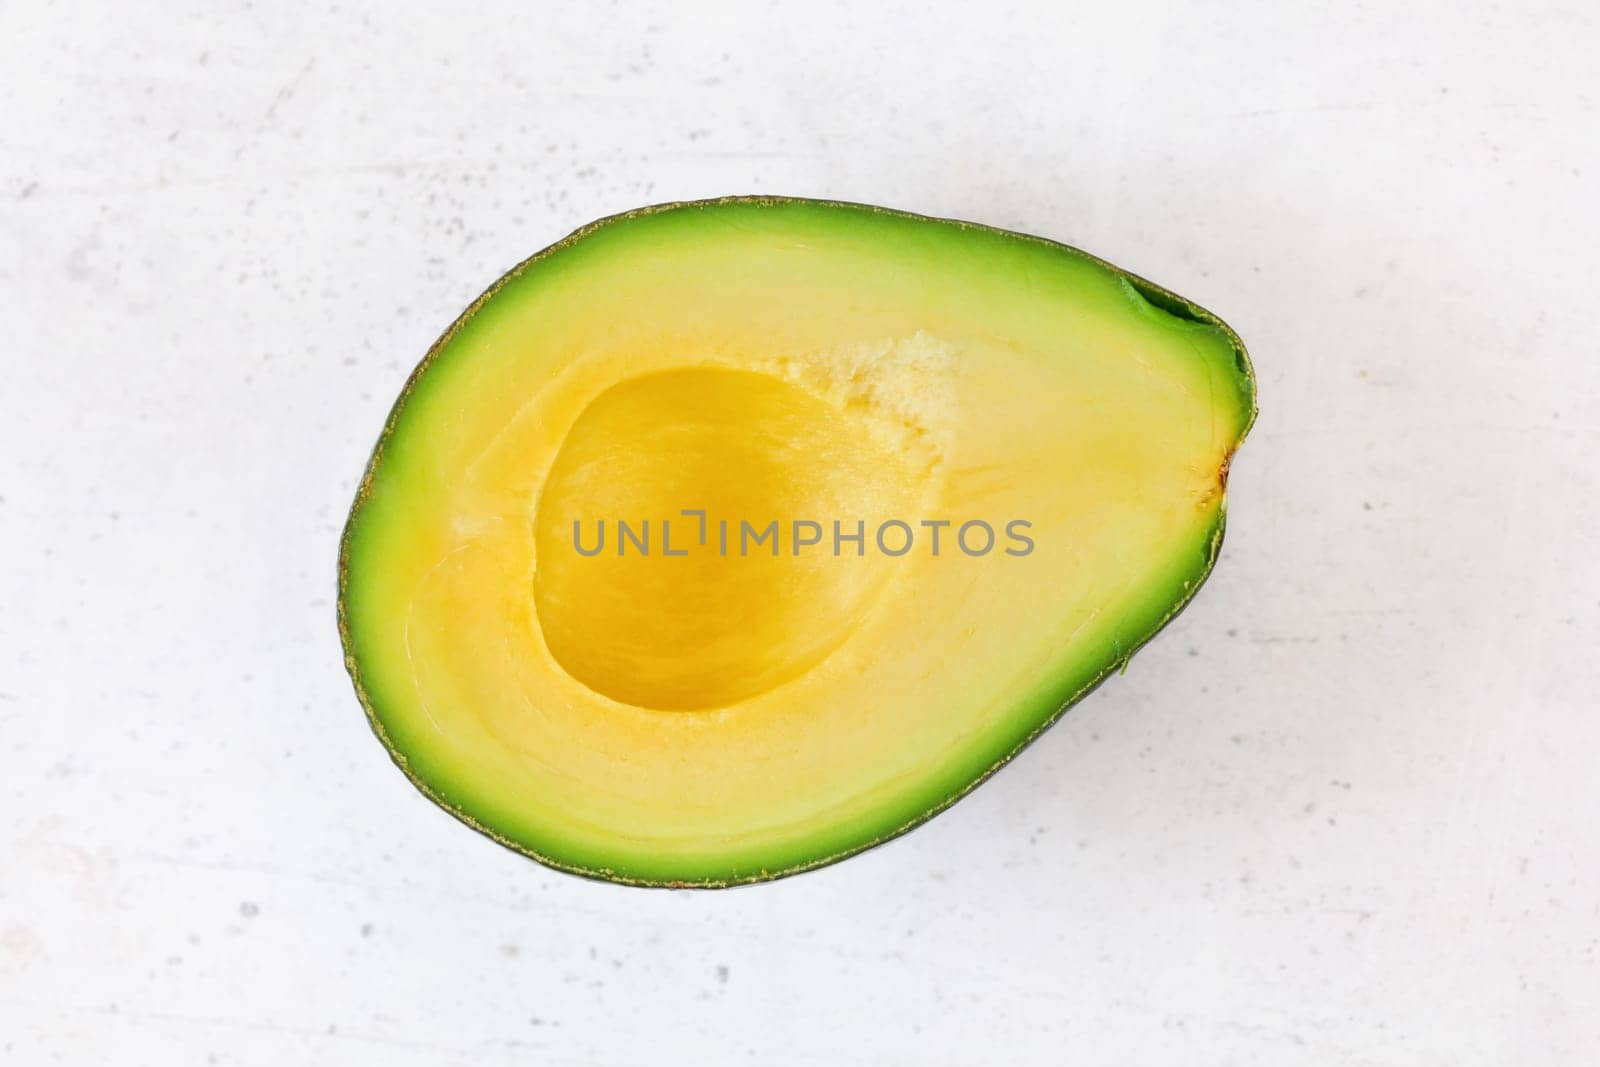 Top down view, halved avocado with yellow fruit pulp on white stone board